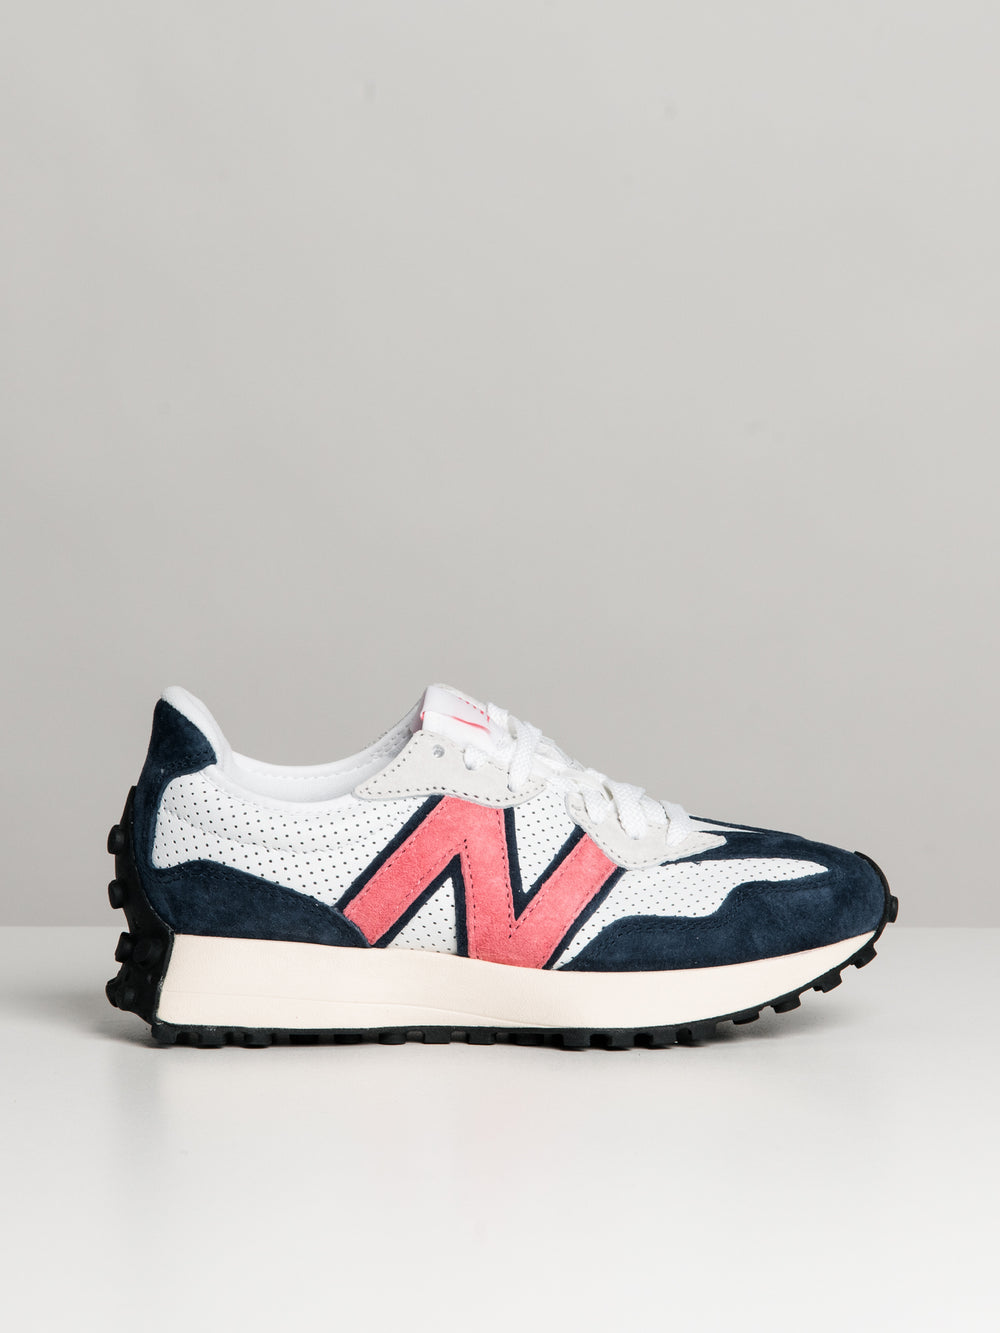 WOMENS NEW BALANCE 327 SNEAKERS - CLEARANCE